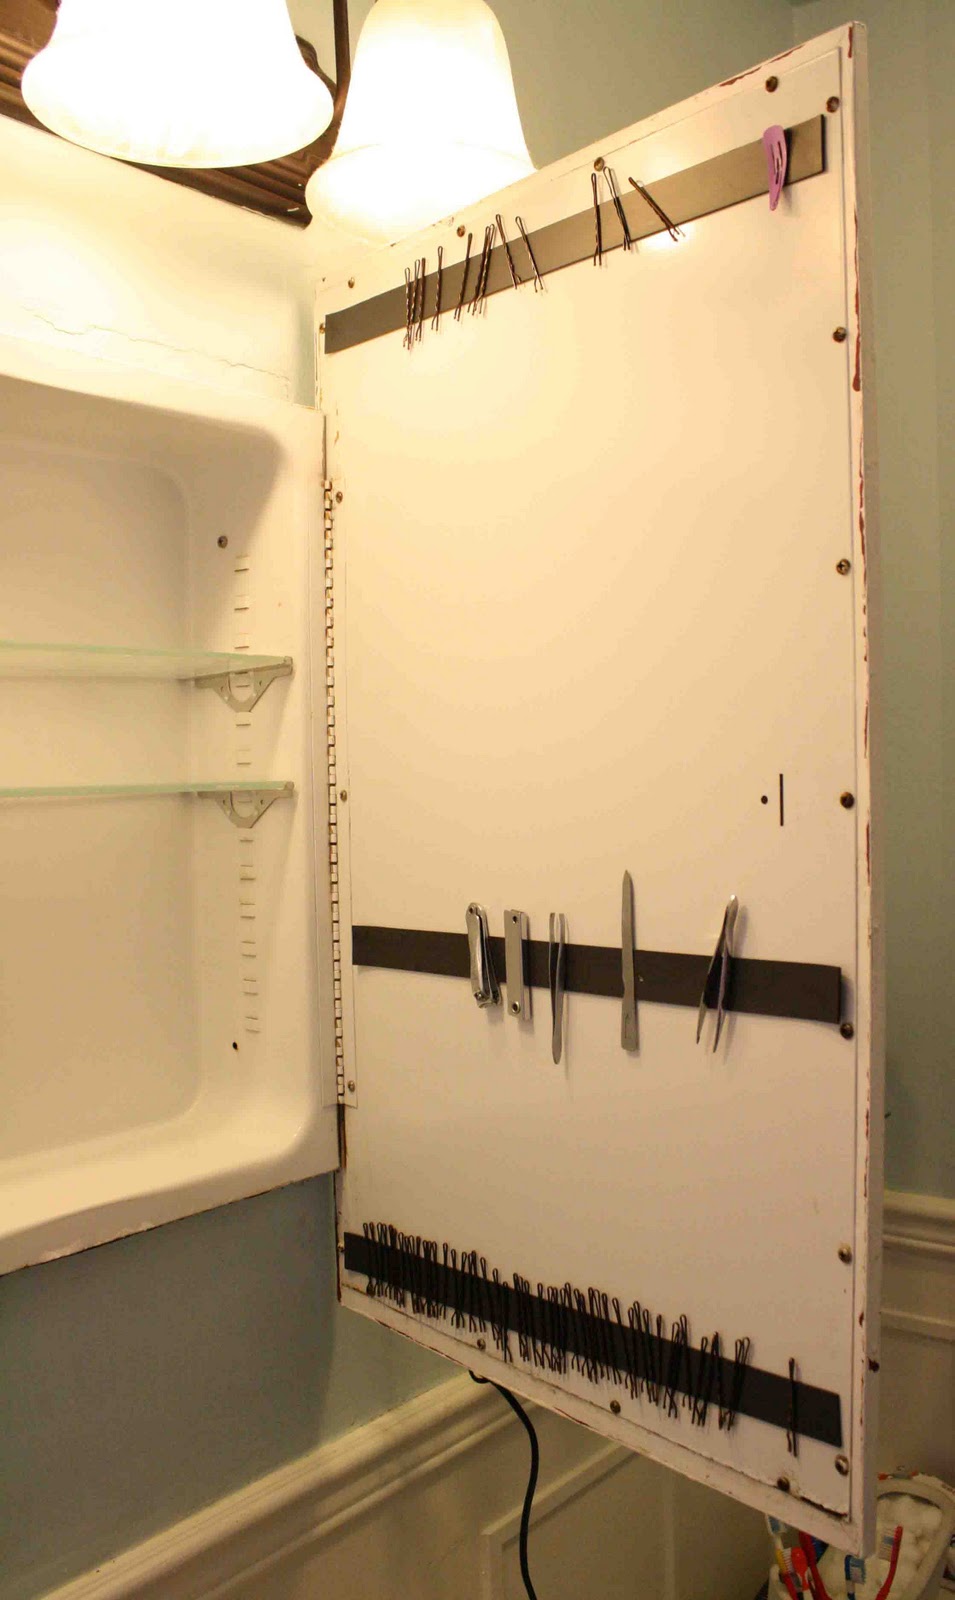 Attach a magnetic strip to the inside of your medicine cabinet door